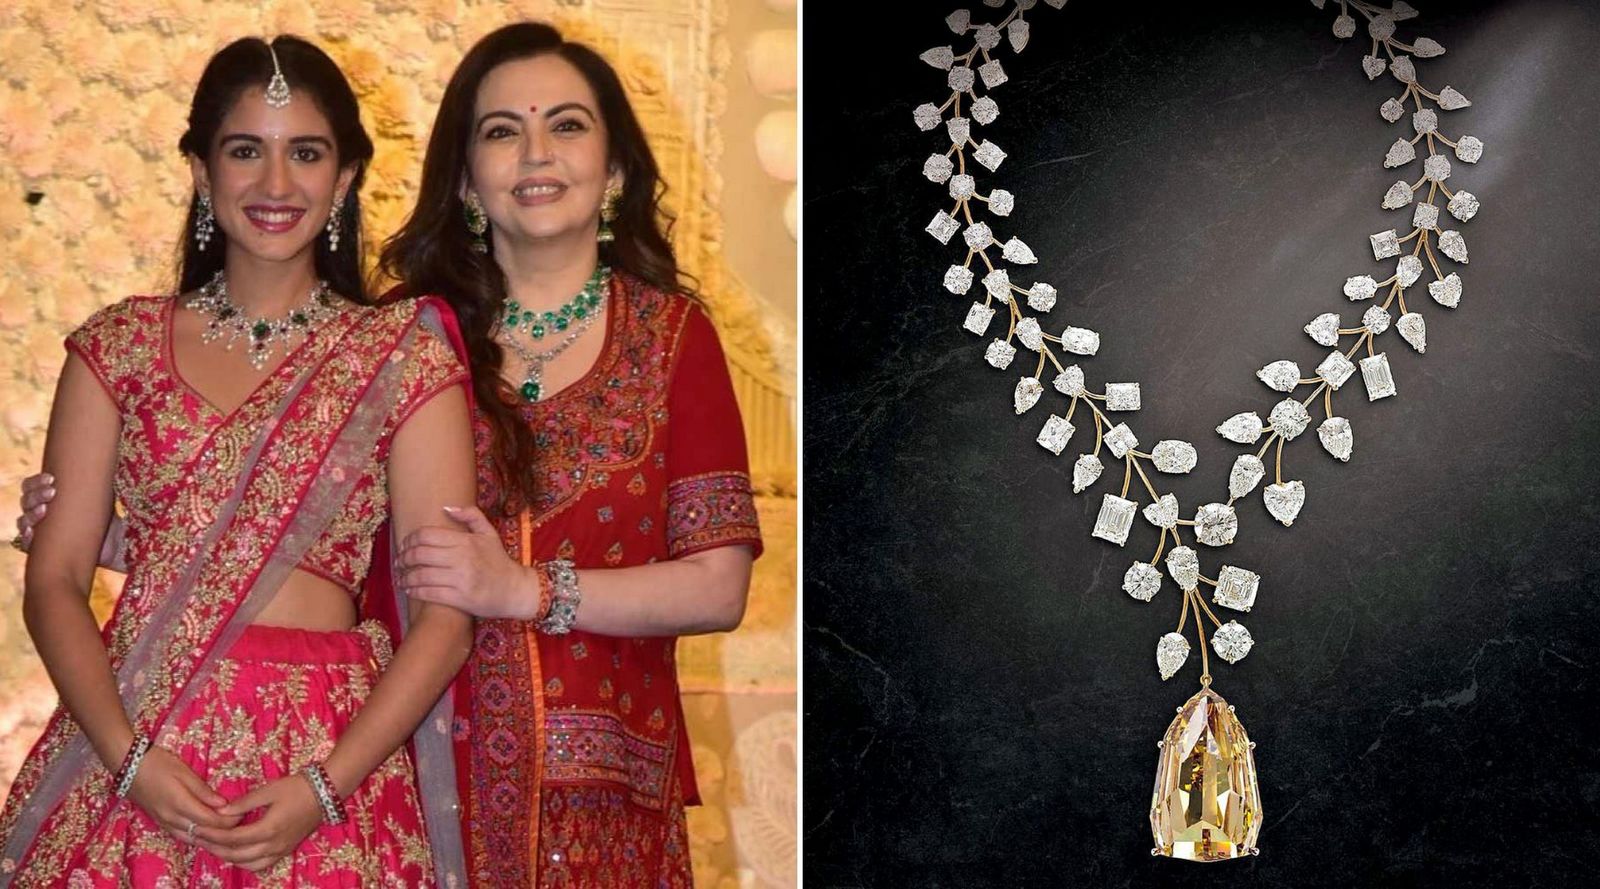 Nita, the wife of Asia's richest man Mukesh Ambani, gifted her  daughter-in-law Shloka the worlds most expensive necklace the $55 million  L'Incomparable. Will she out do herself with an even more extravagant